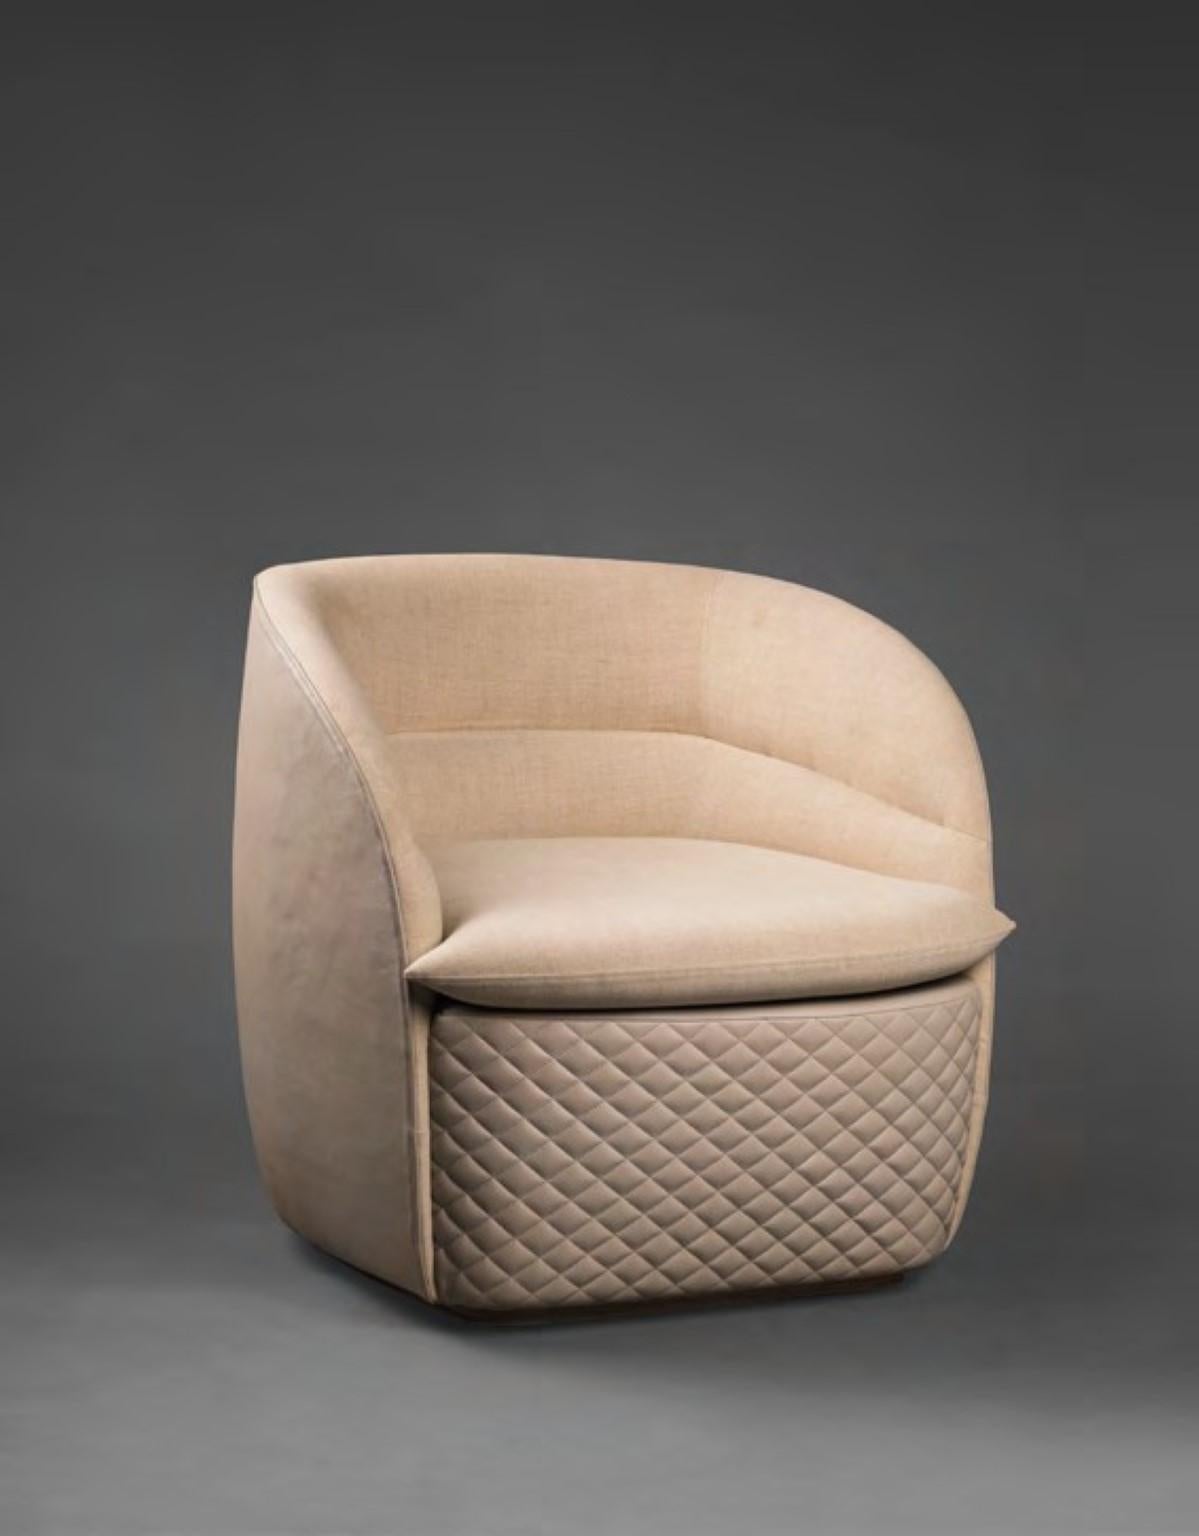 Upholstered Annis Armchair by Madheke
Dimensions: W 85 x D 89 x H 82 cm
Materials: Leather, Fabric

Quilted front, upholstered back and outer.

Reflecting the finest in craftsmanship, innovation and heritage, Madheke creates tailored and